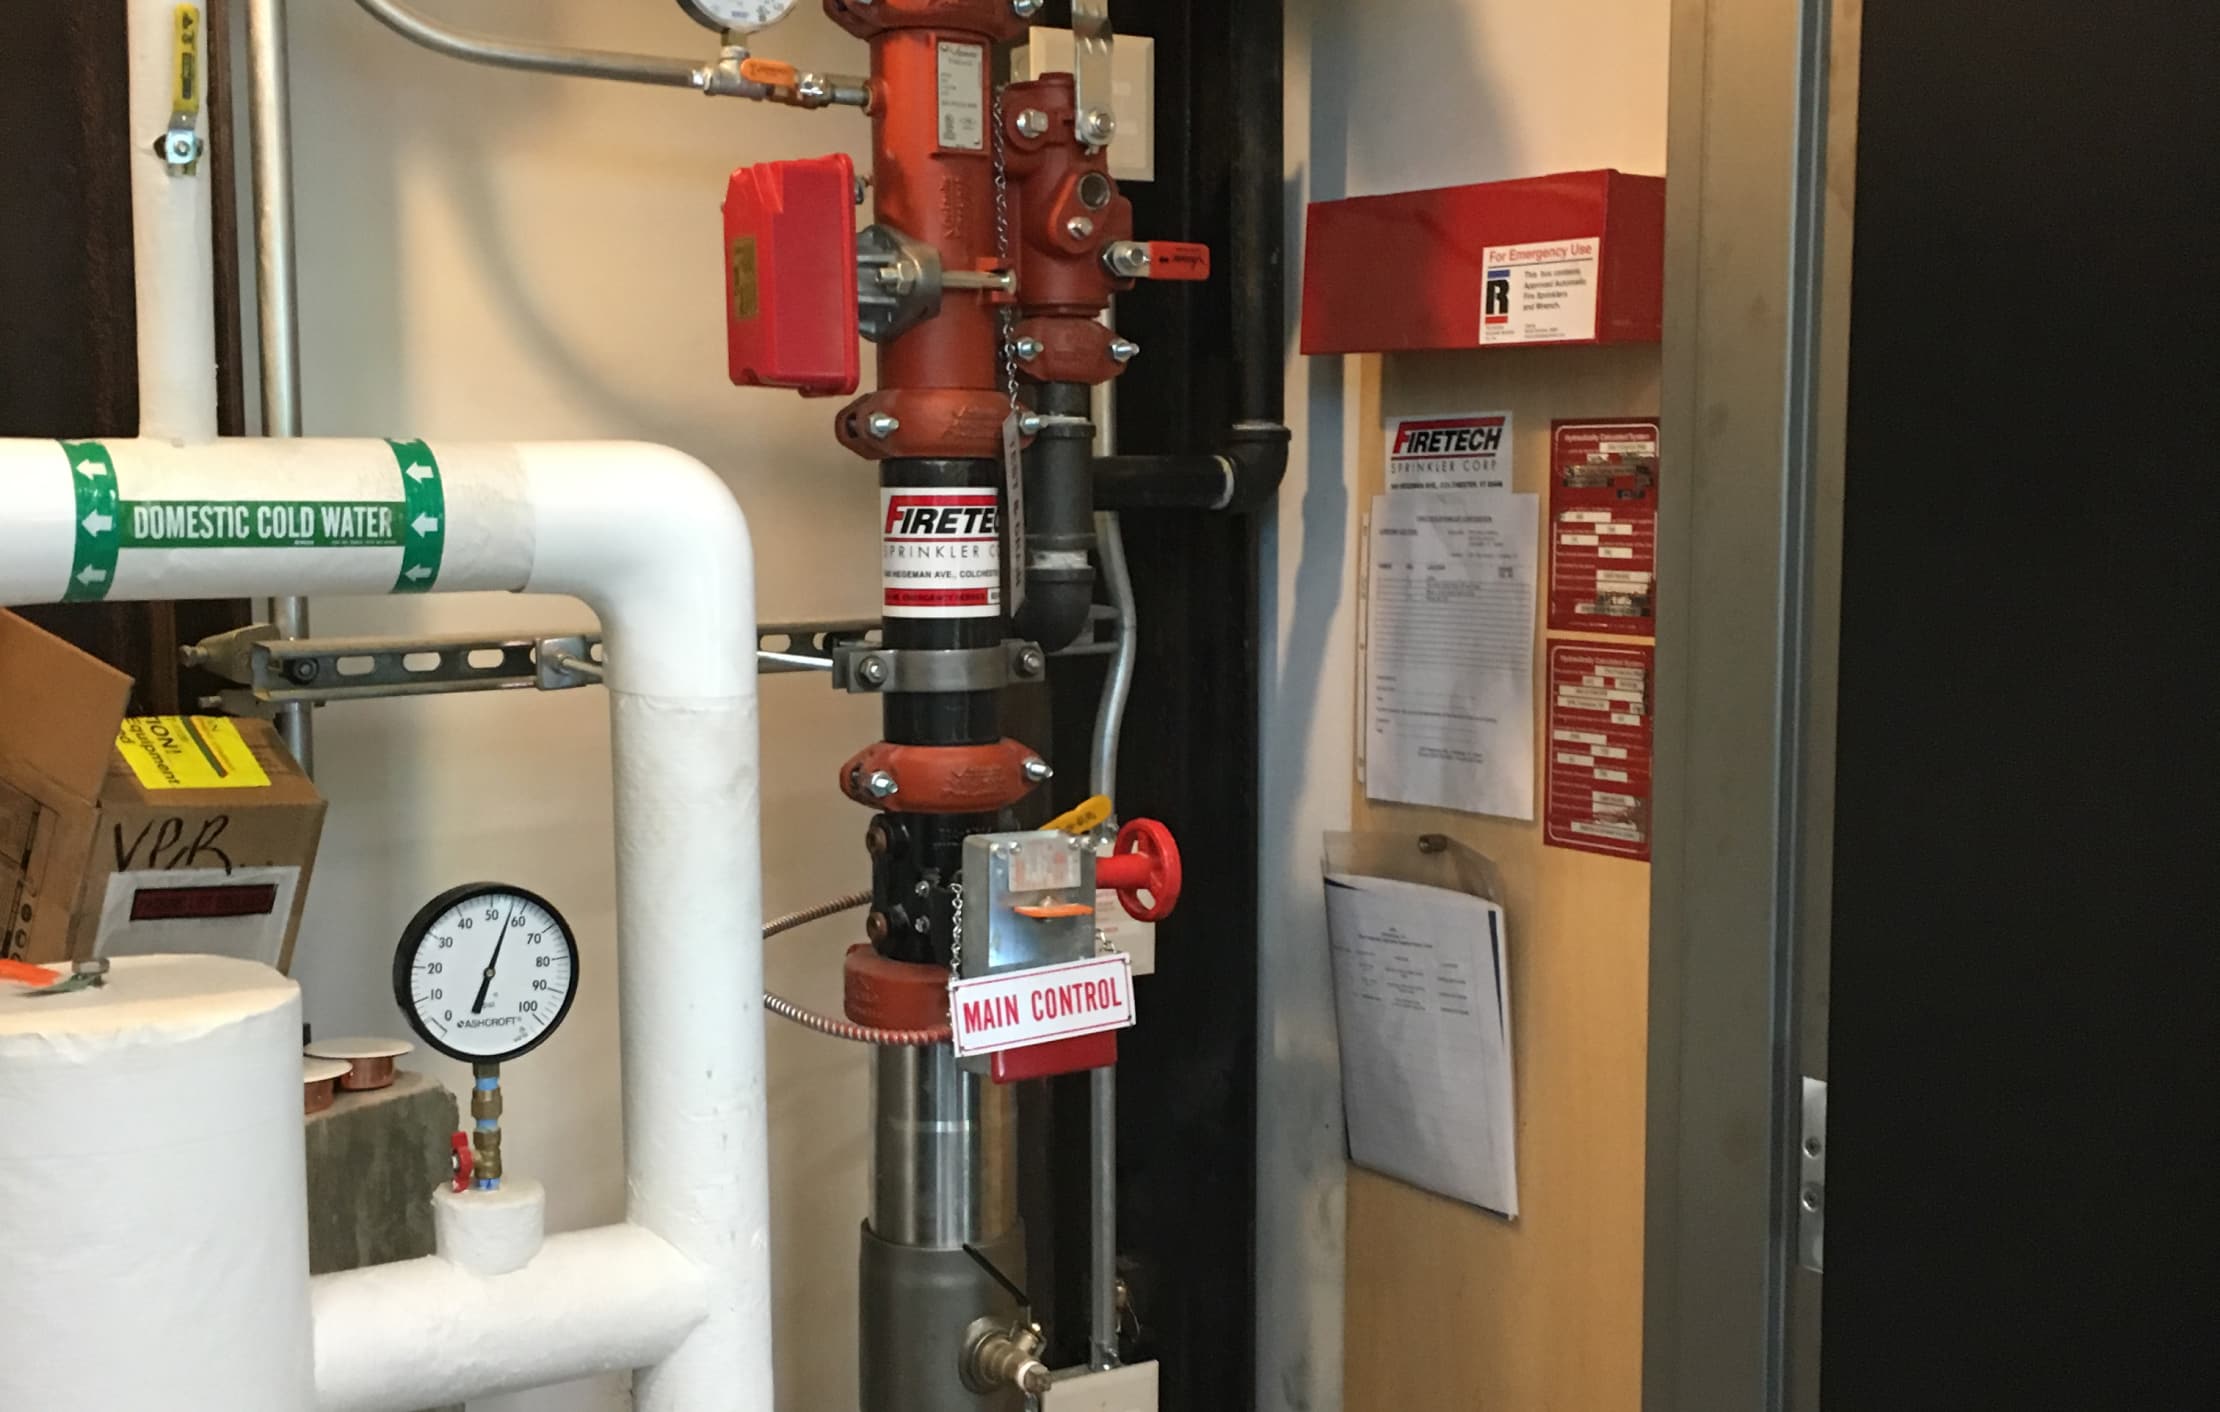 Firetech Sprinkler fire protaction system pipes controls